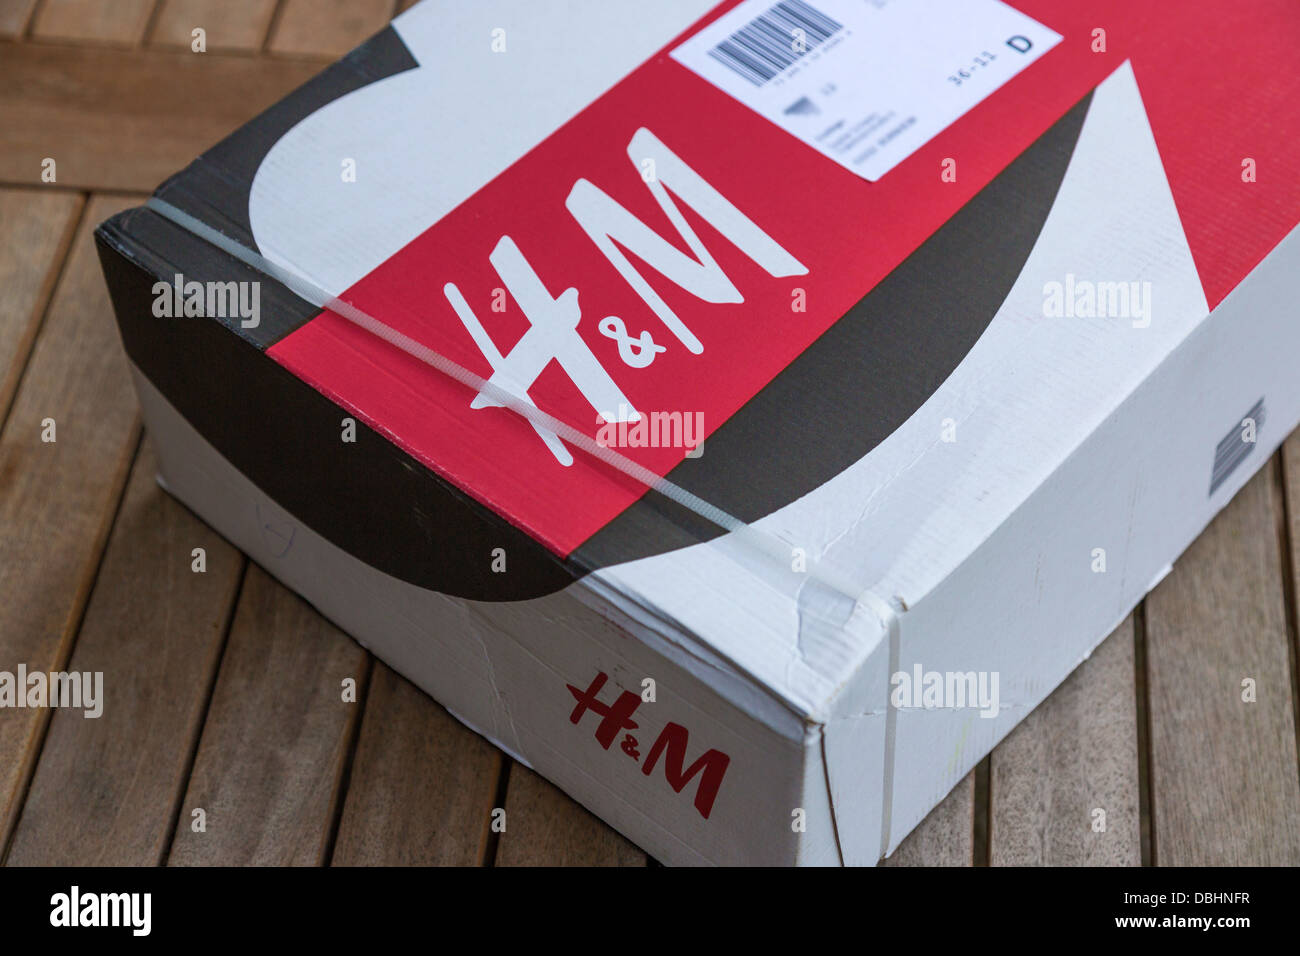 Package of fashion retailer H&M Stock Photo - Alamy